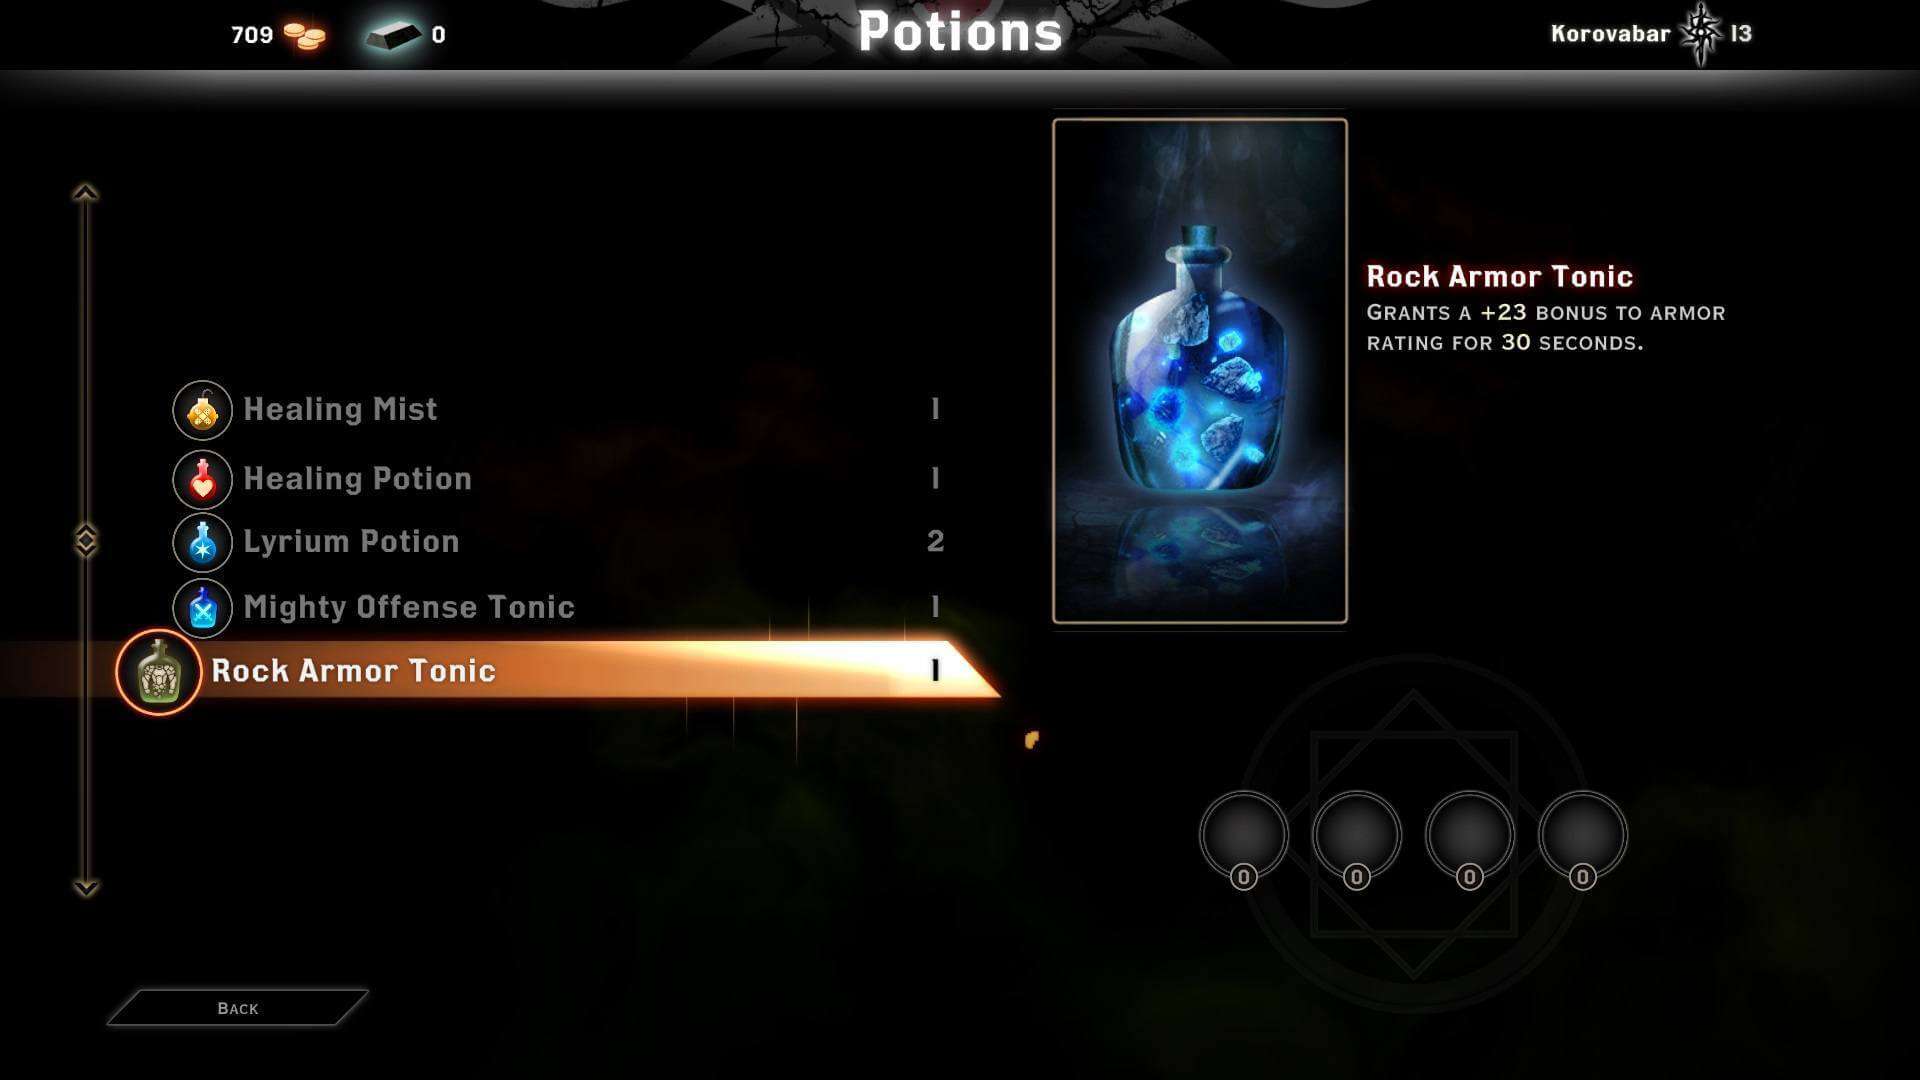 Dragon Age Inquisition Multiplayer Potions Menu